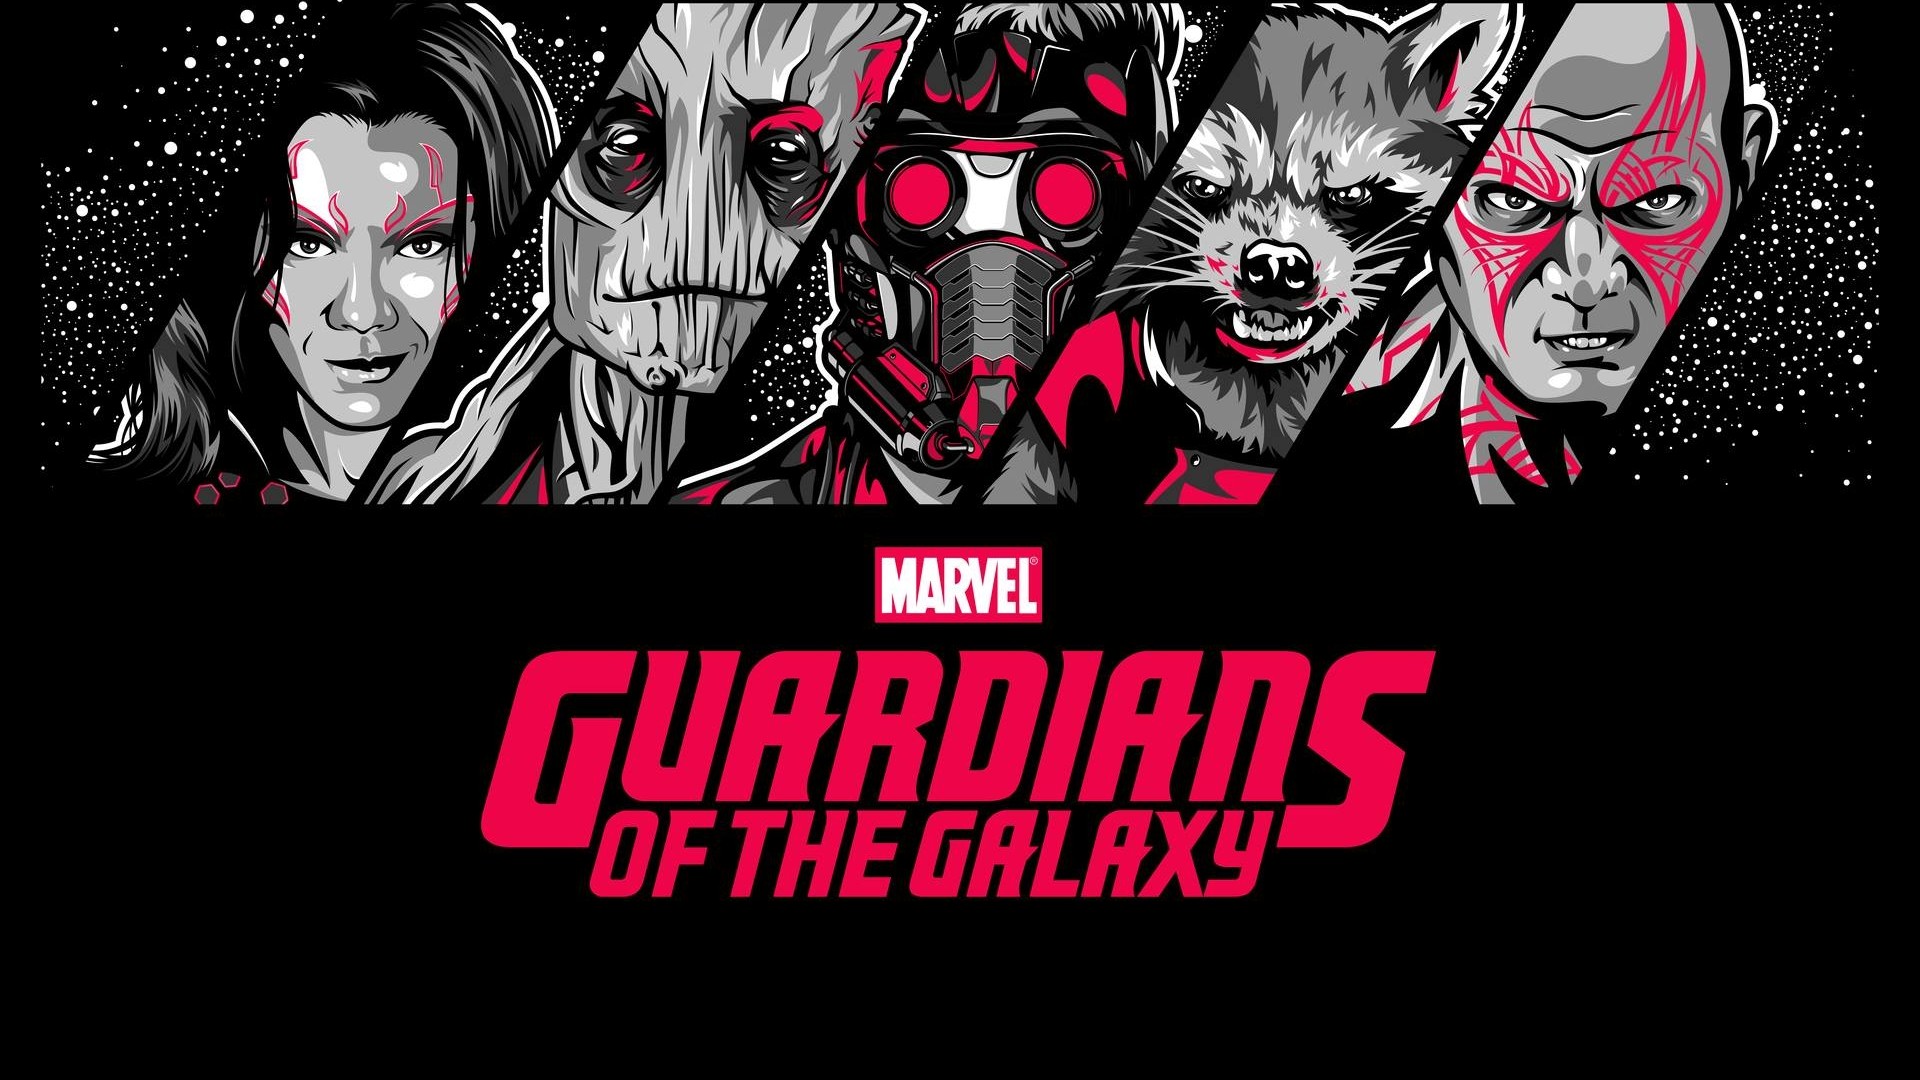 Guardians Of The Galaxy, Star Lord, Gamora, Rocket Raccoon, Groot, Drax The Destroyer Wallpaper